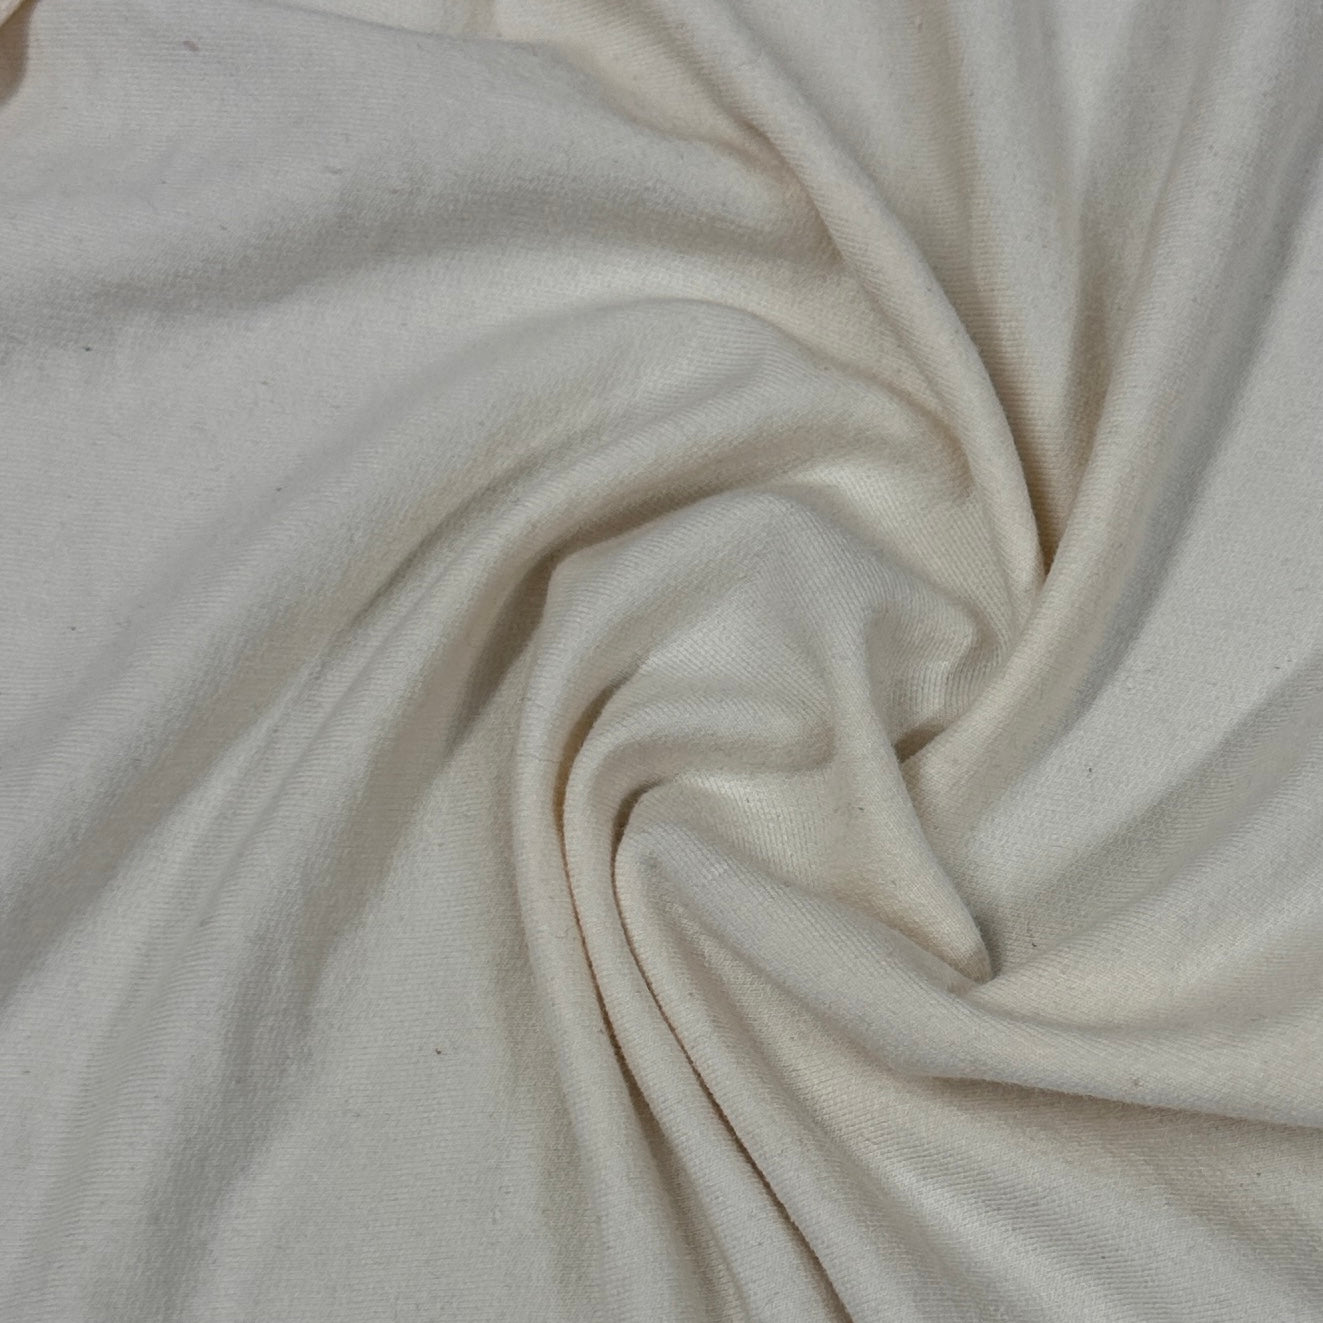 Natural Medium Weight Organic Cotton French Terry Fabric - Grown in the USA